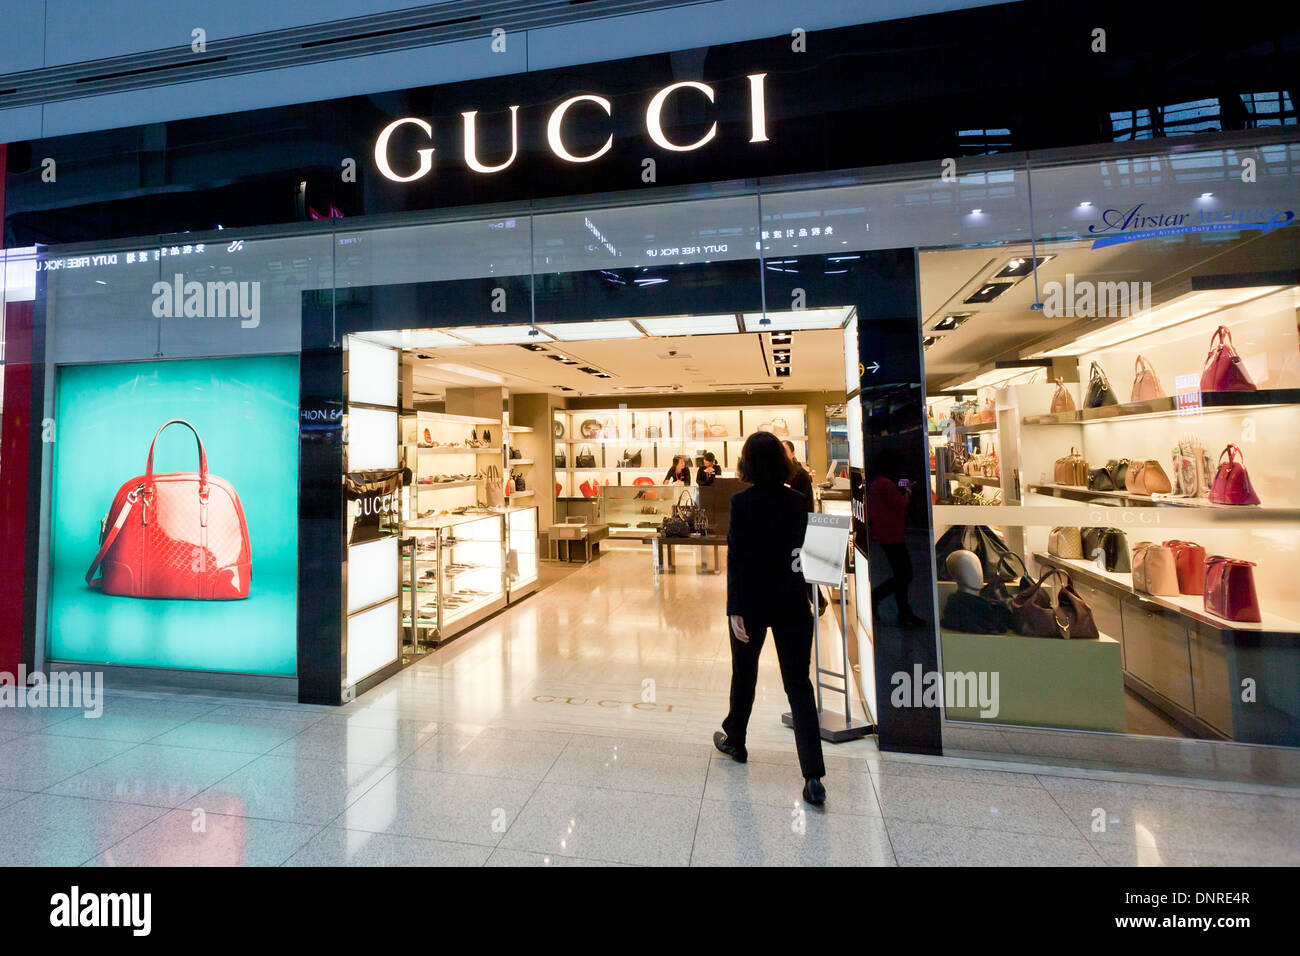 Gucci storefront at Incheon International Airport - South Korea Stock ...